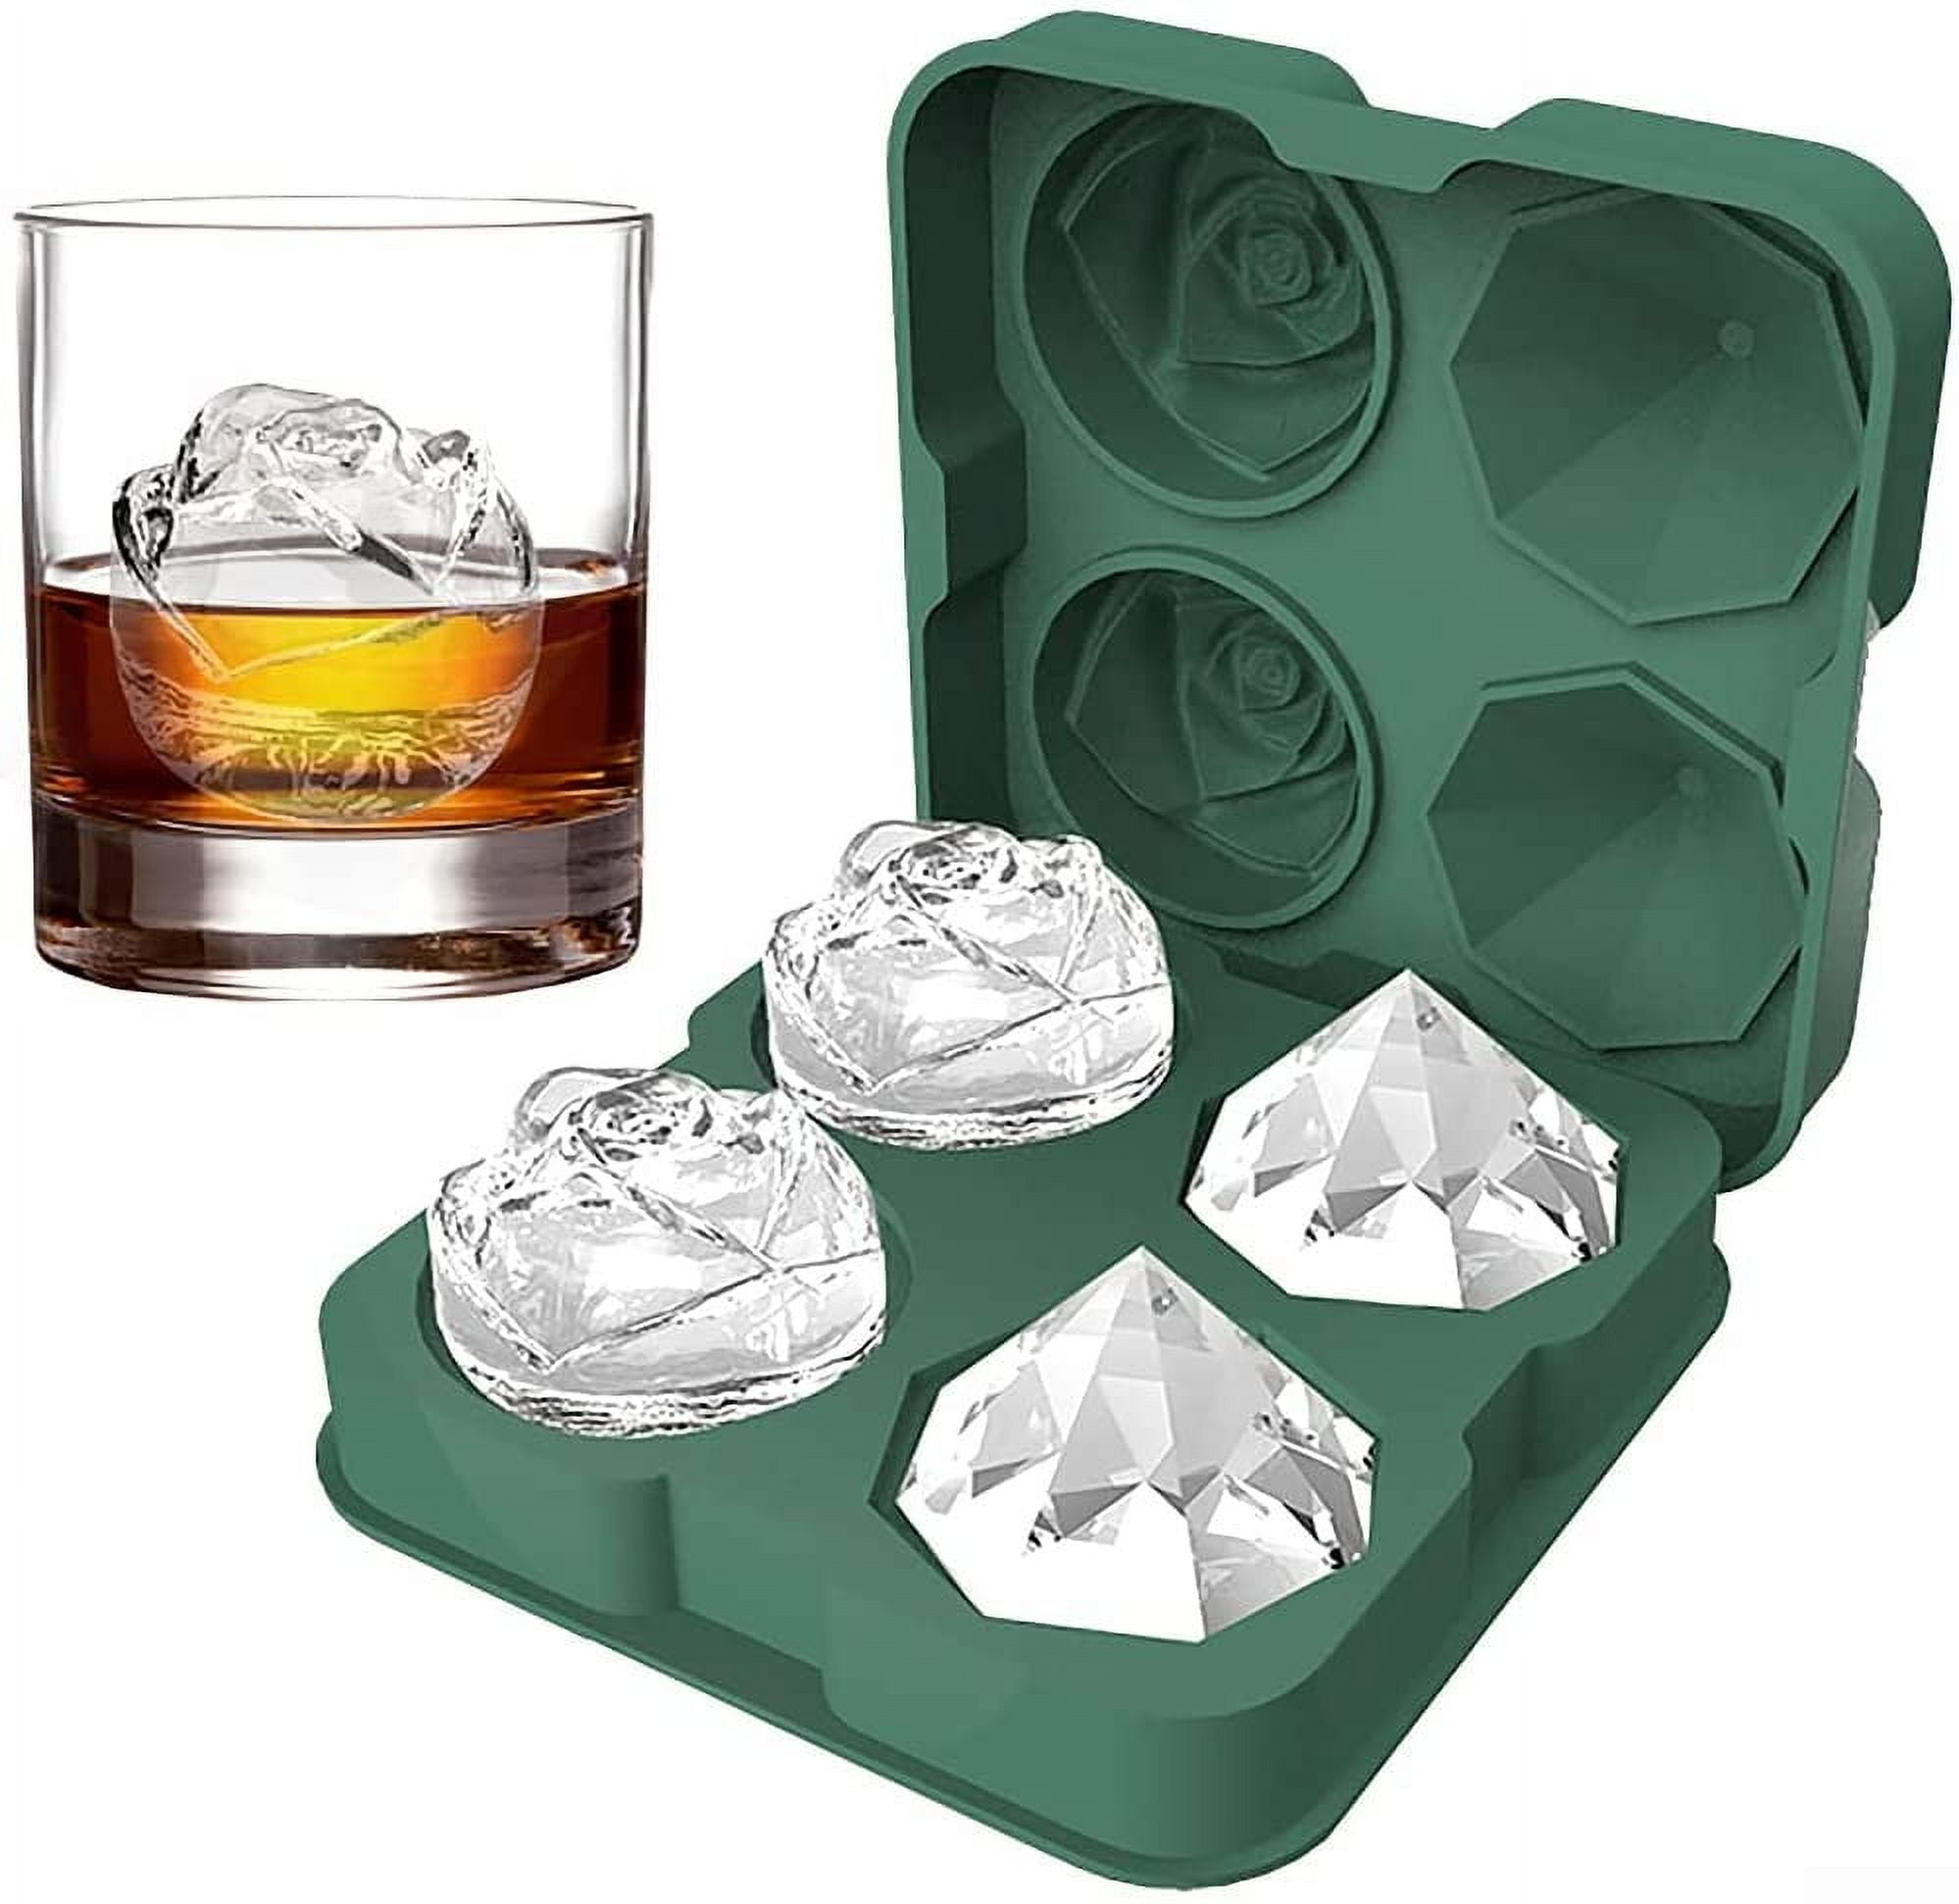 AMFOCUS Ice Cube Tray with Lid, Silicone Ice Molds with Round, Square, Diamond, Rose, Large Ice Cube Mold for Whiskey, Bourbon, Cocktails, Easy Release BPA